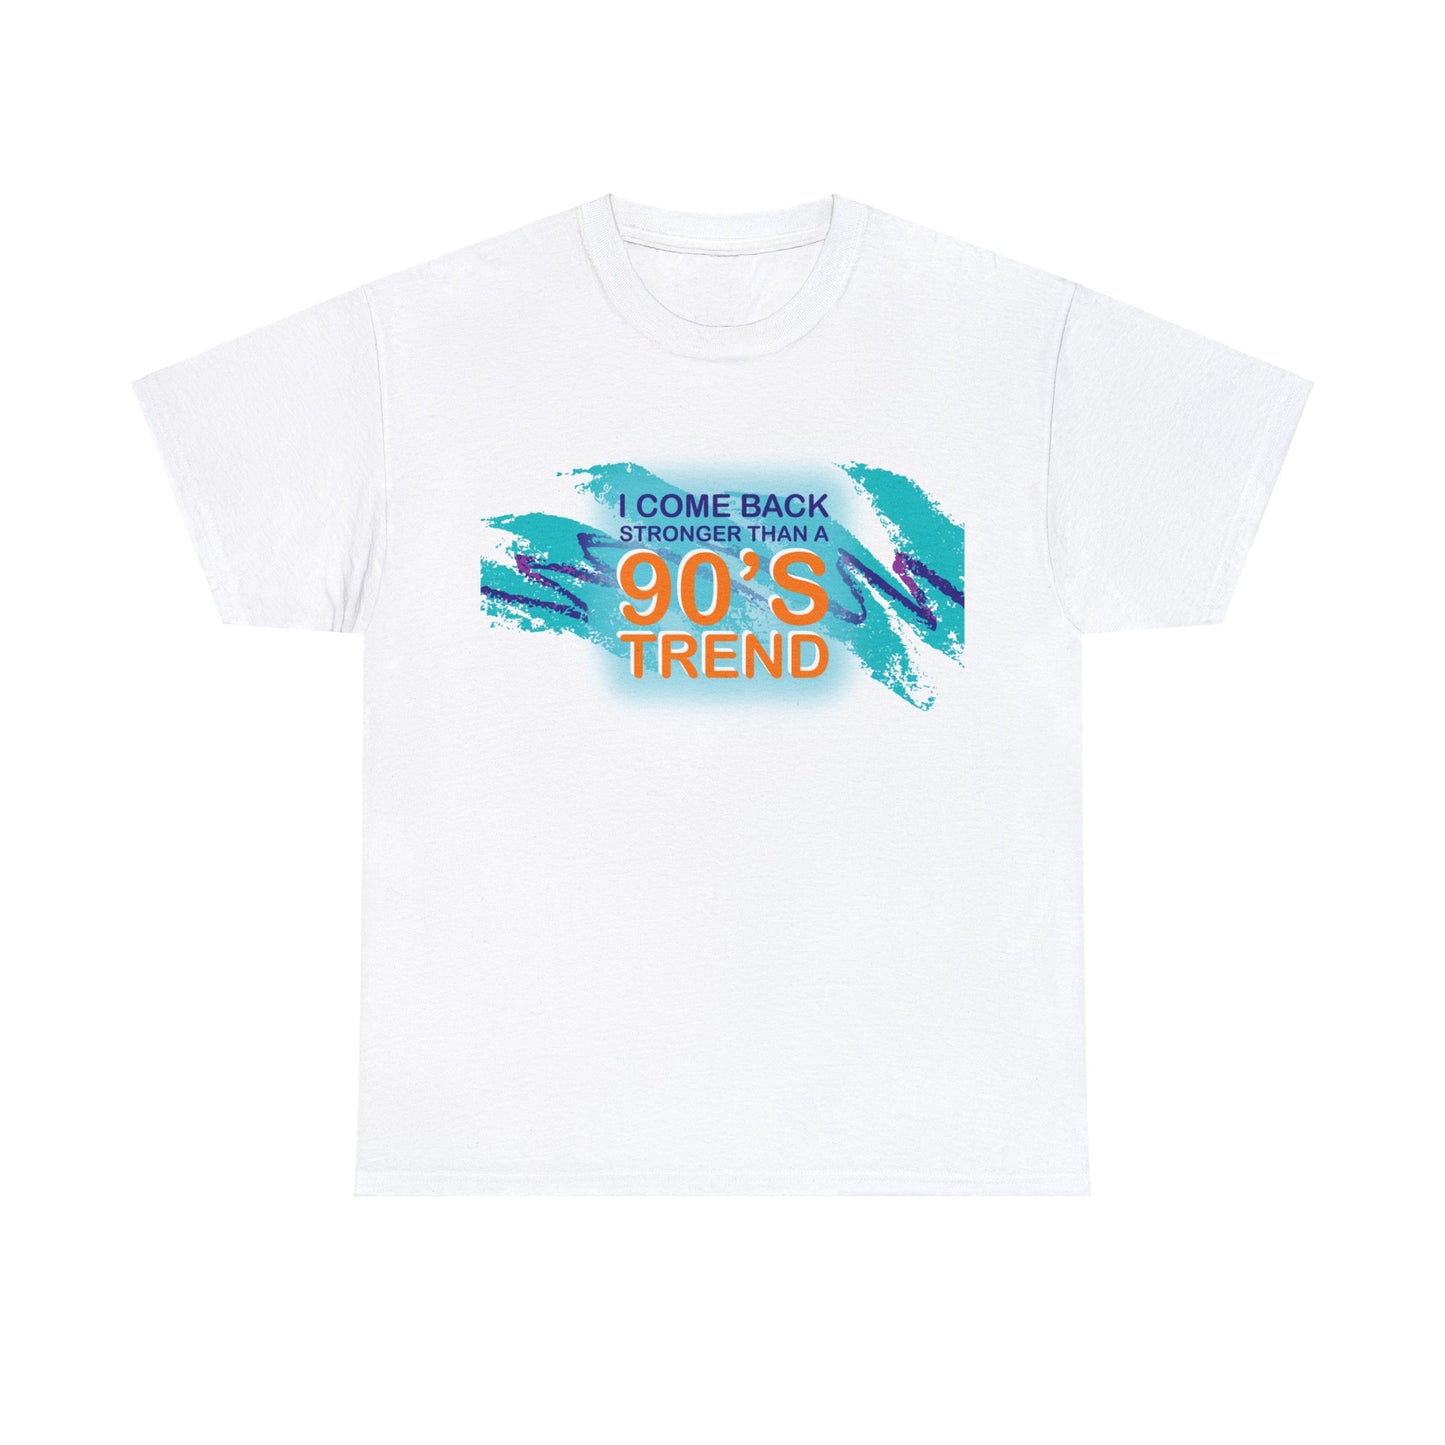 T-shirt featuring the iconic design of "I come back stronger then a 90s trend" with the retro Jazz Design.